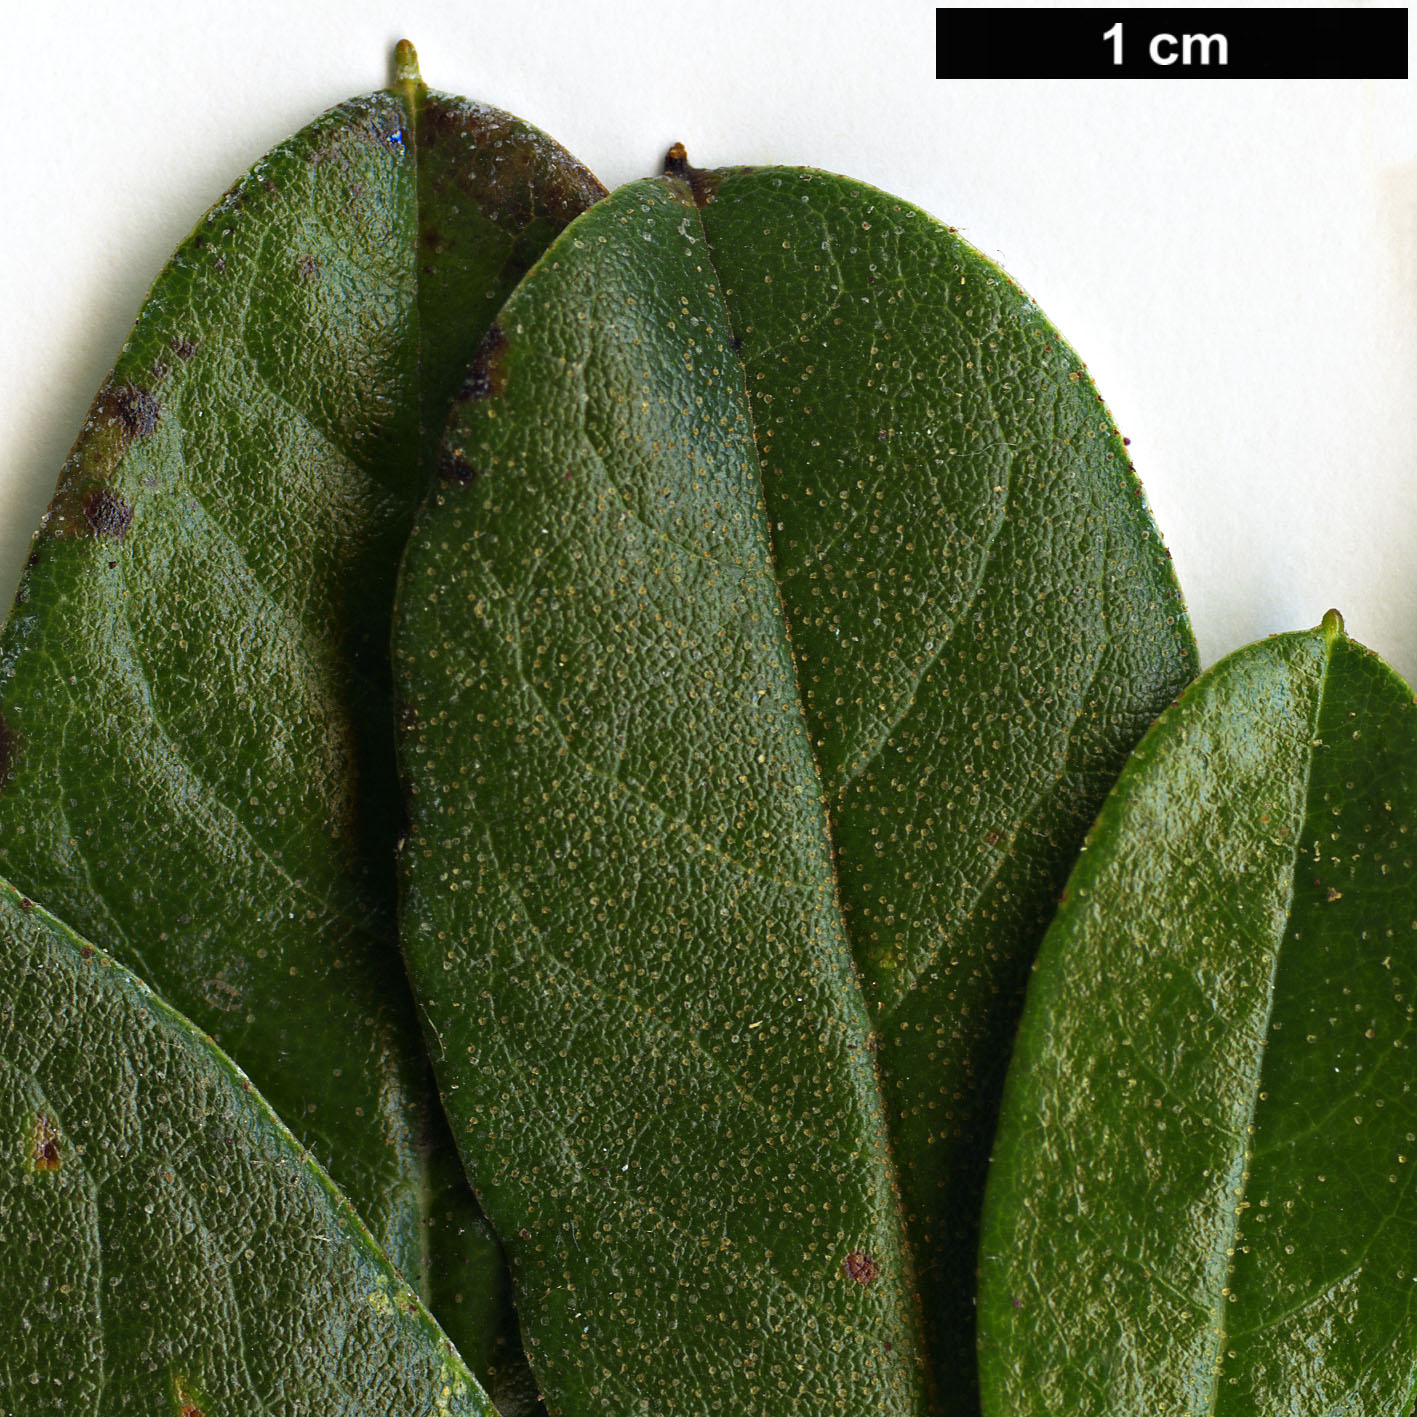 High resolution image: Family: Ericaceae - Genus: Rhododendron - Taxon: charitopes - SpeciesSub: subsp. charitopes